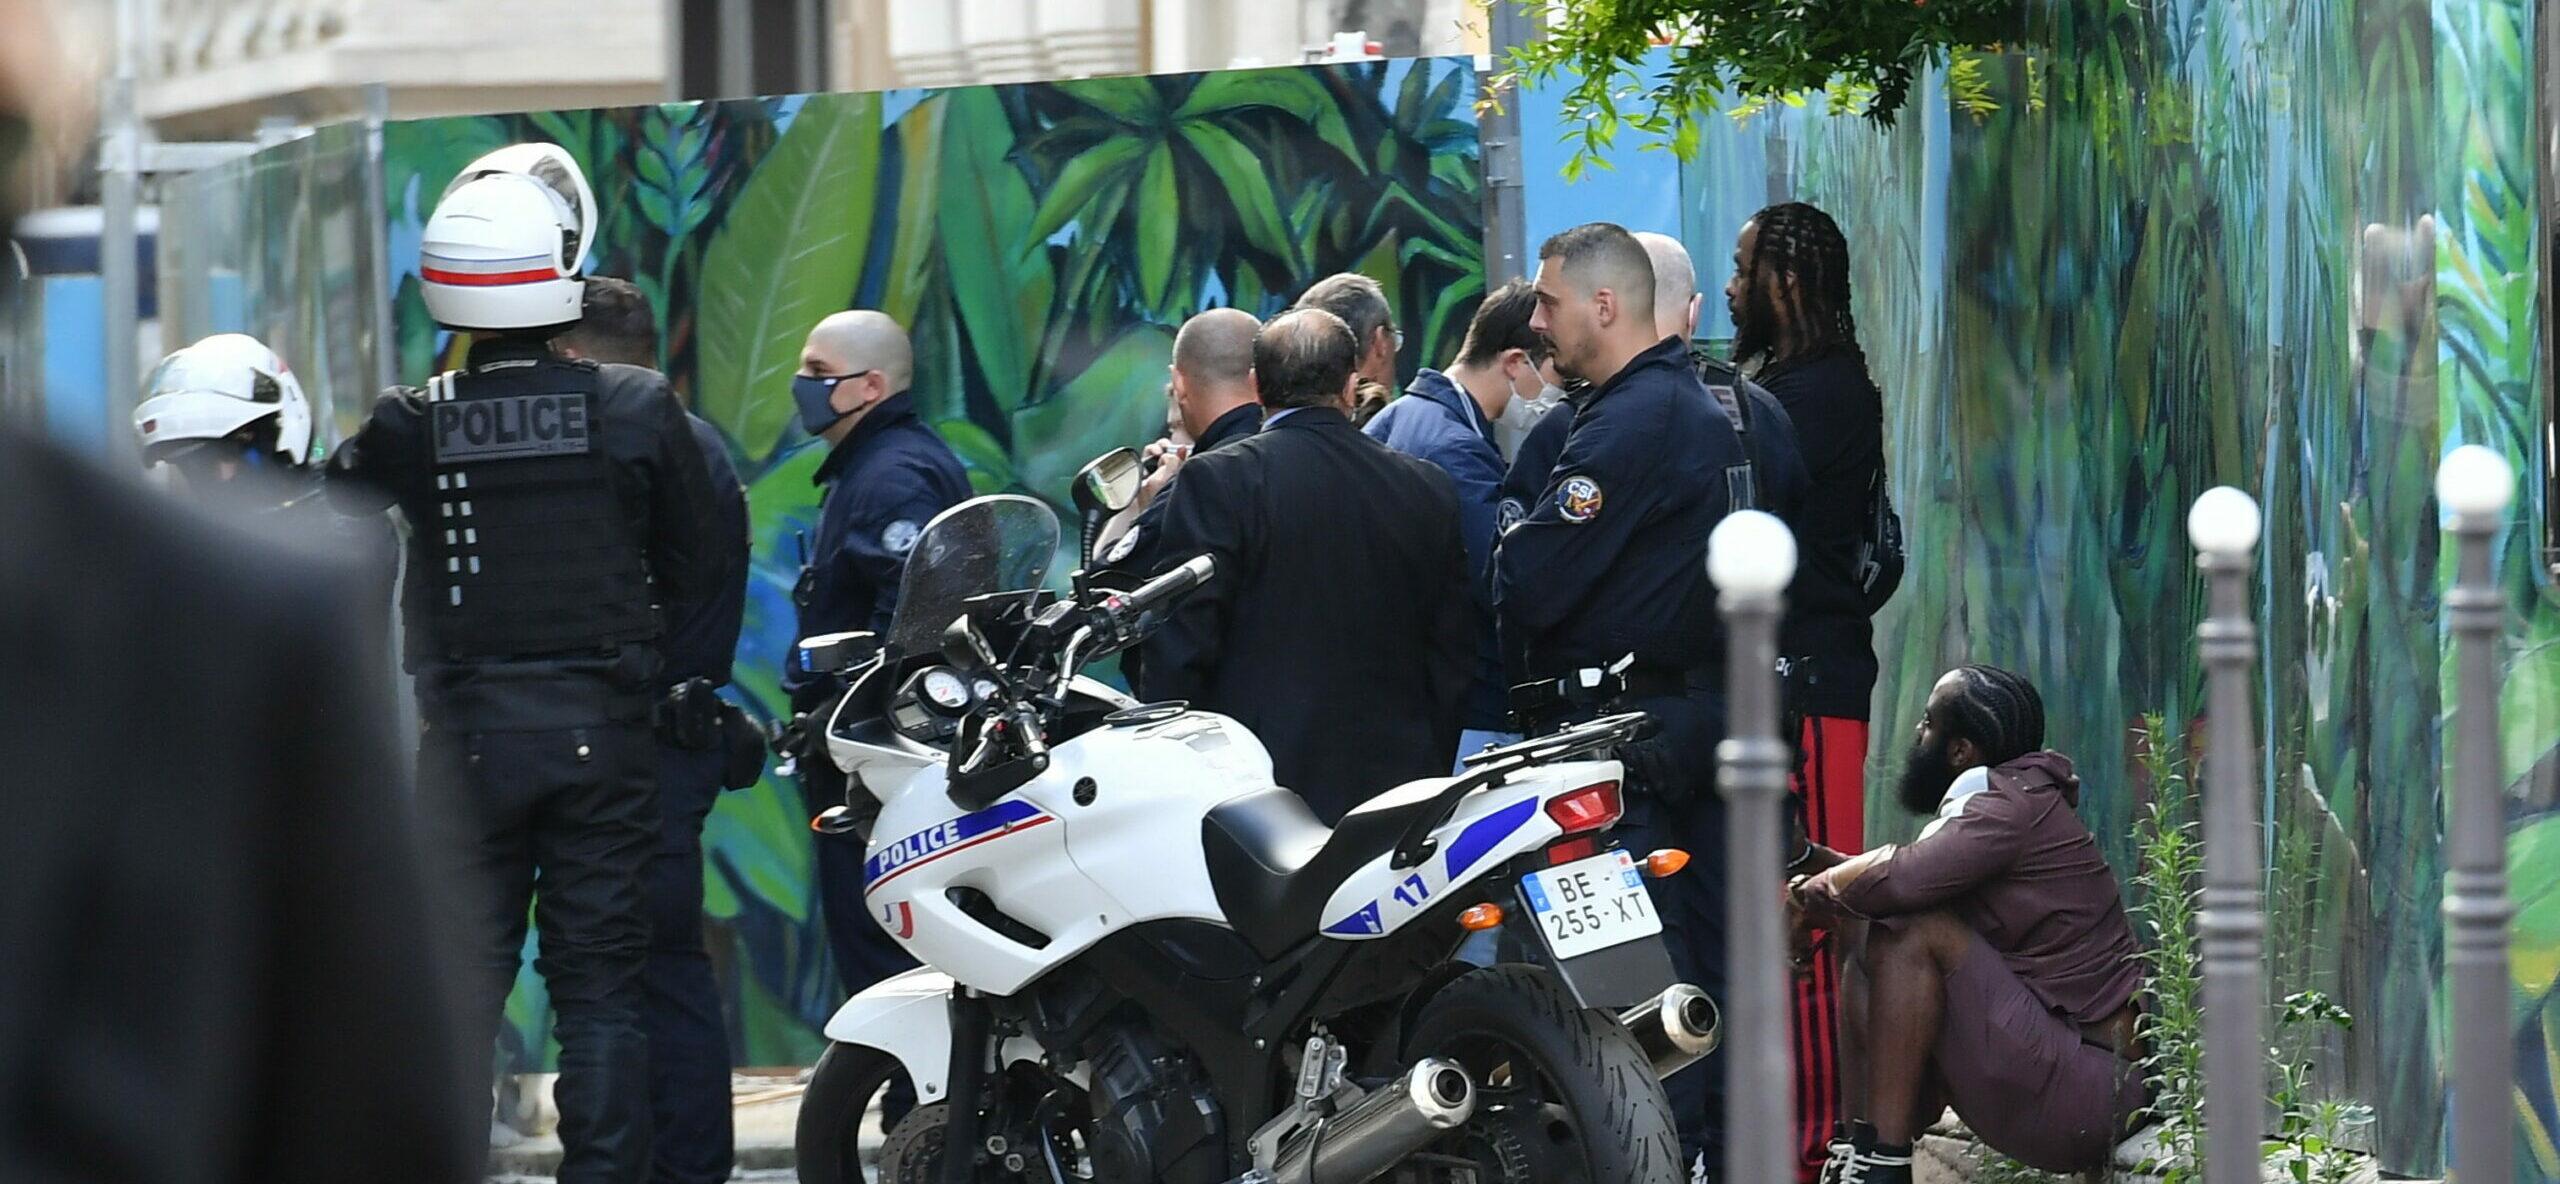 NBA Basket player James Harden during a Police control in Paris